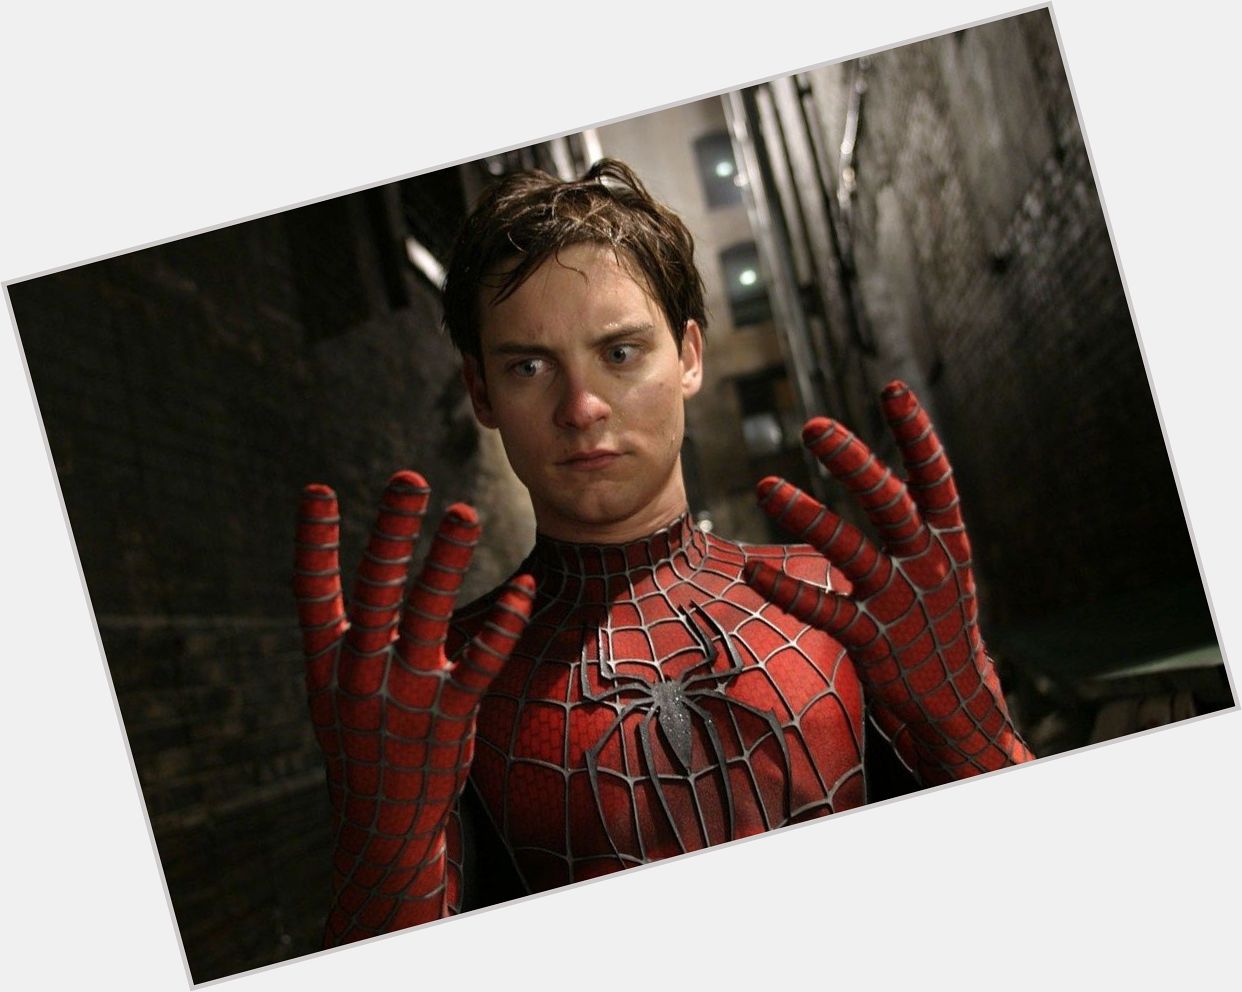 Wanna feel old? Former Tobey Maguire is going to be 50 in 8 years. Happy birthday, Tobey! 